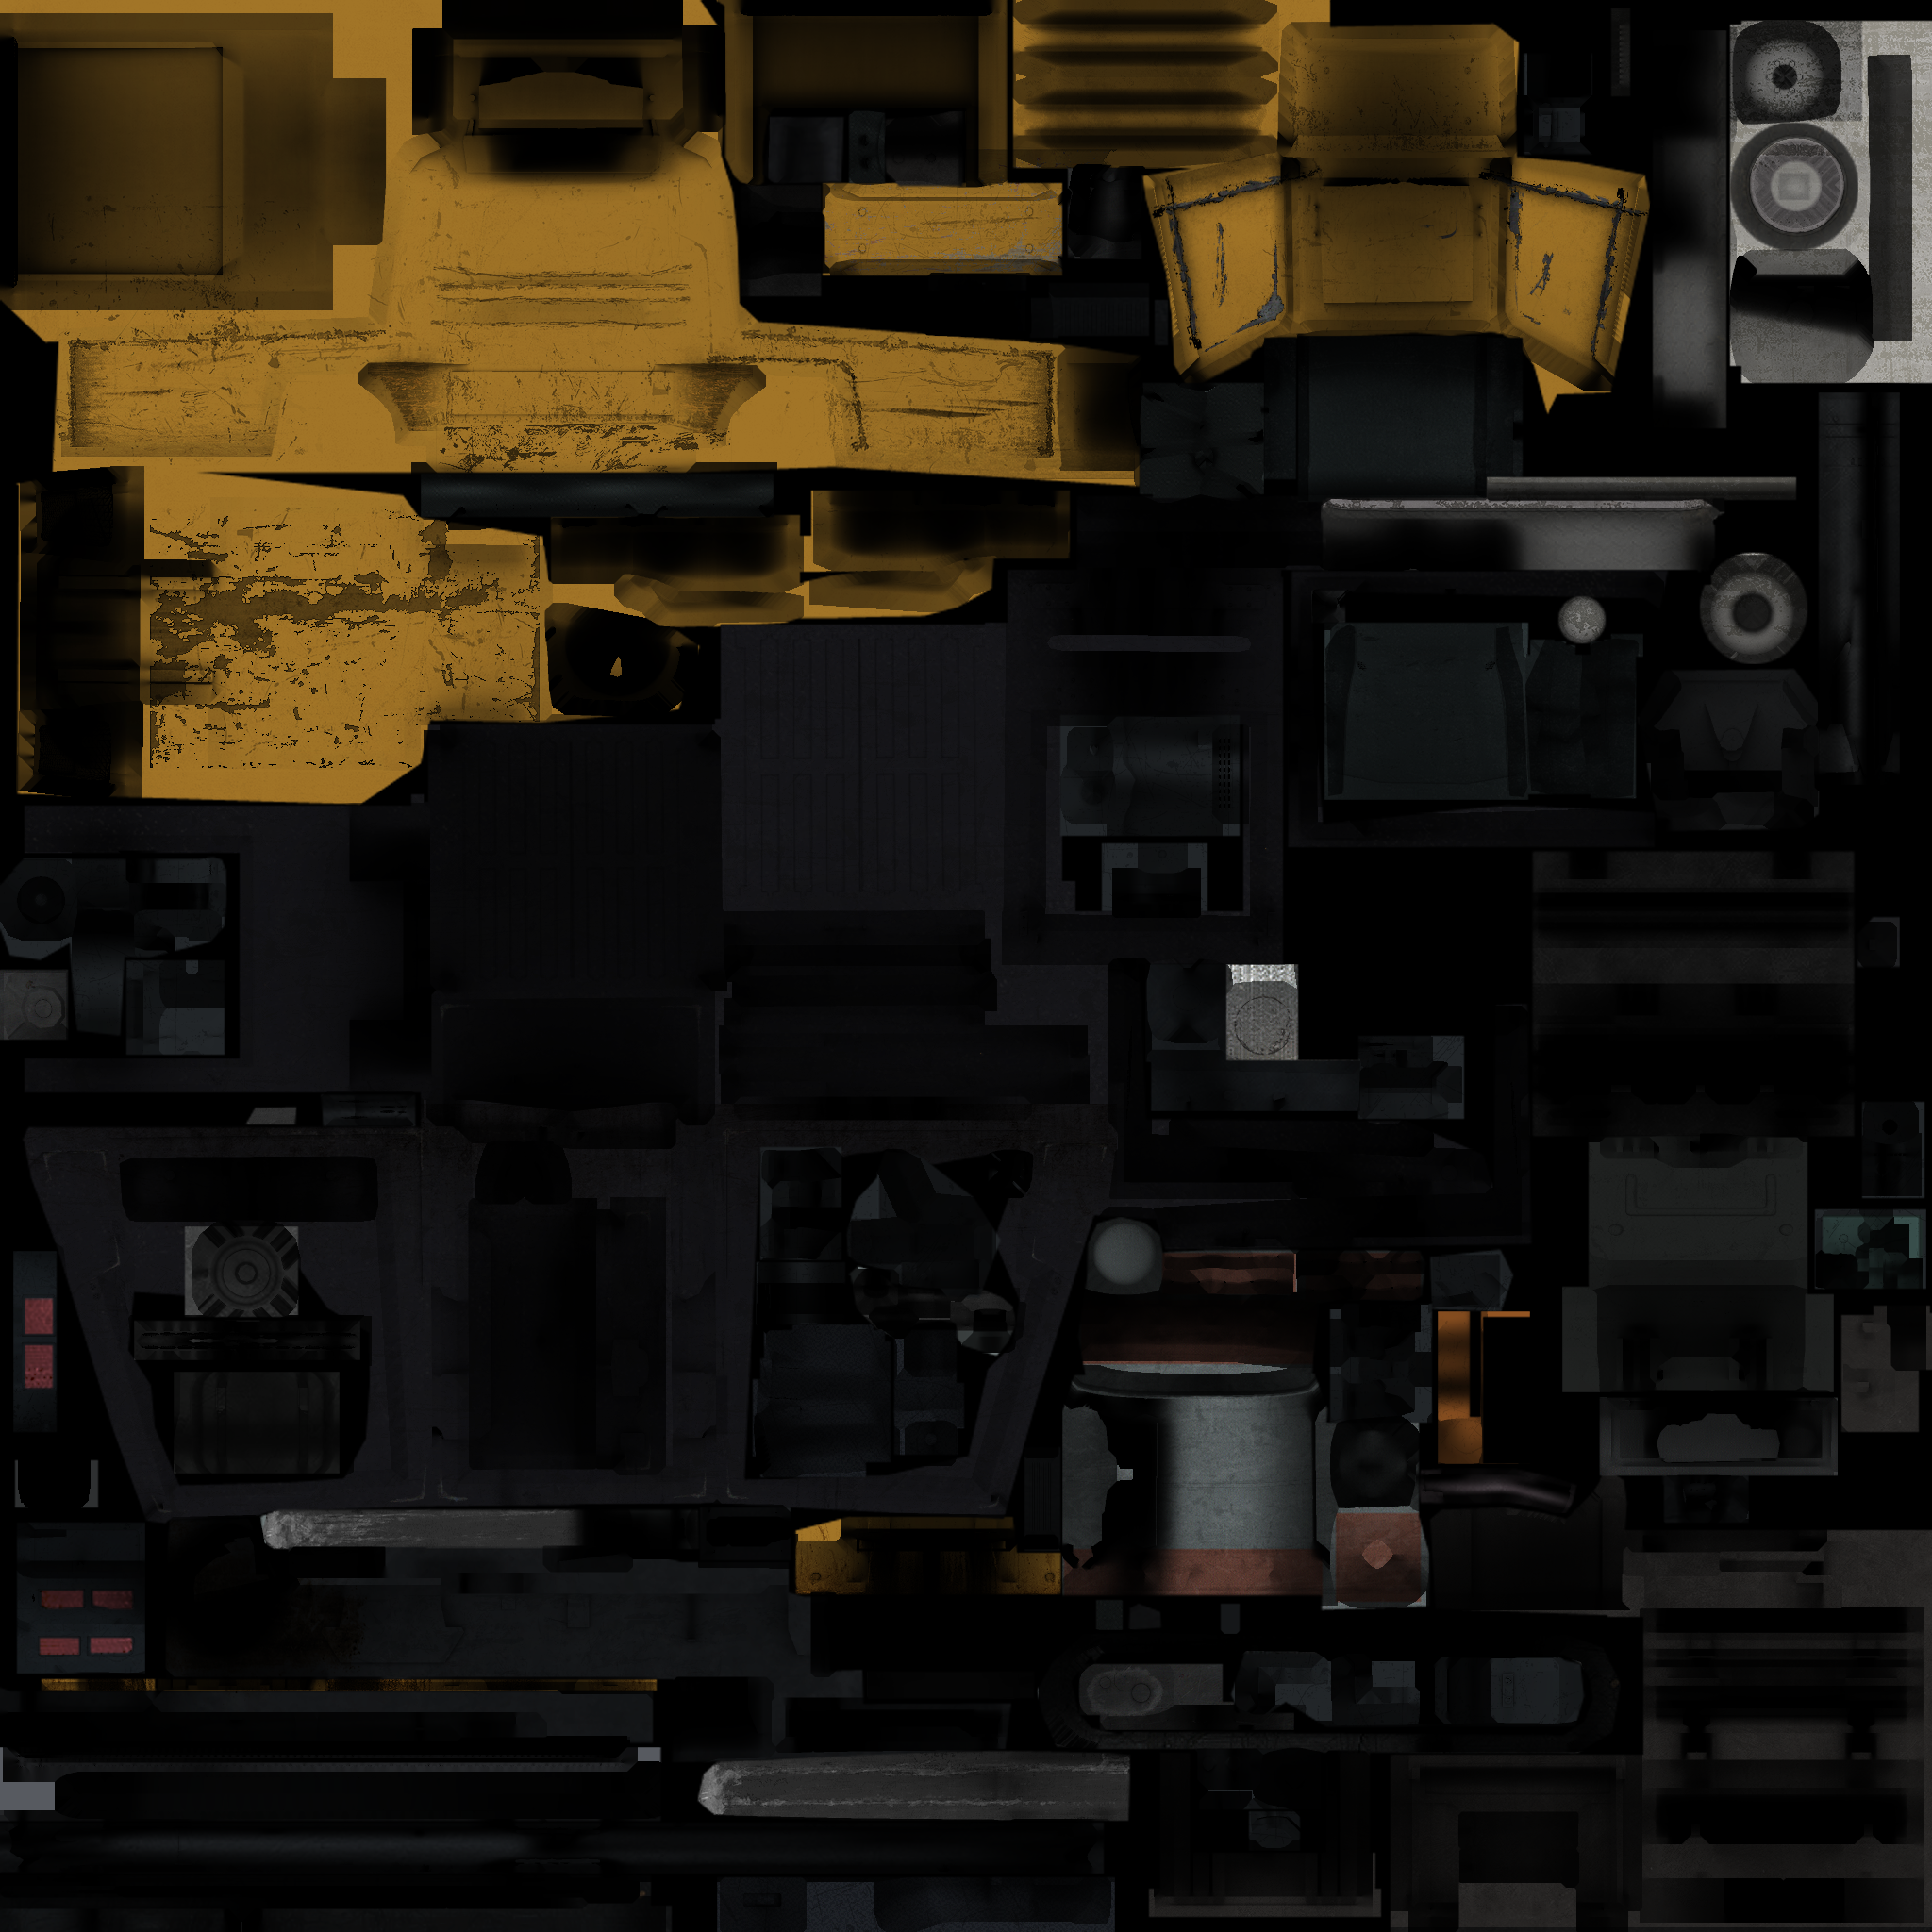 Forklift_diffuse.png